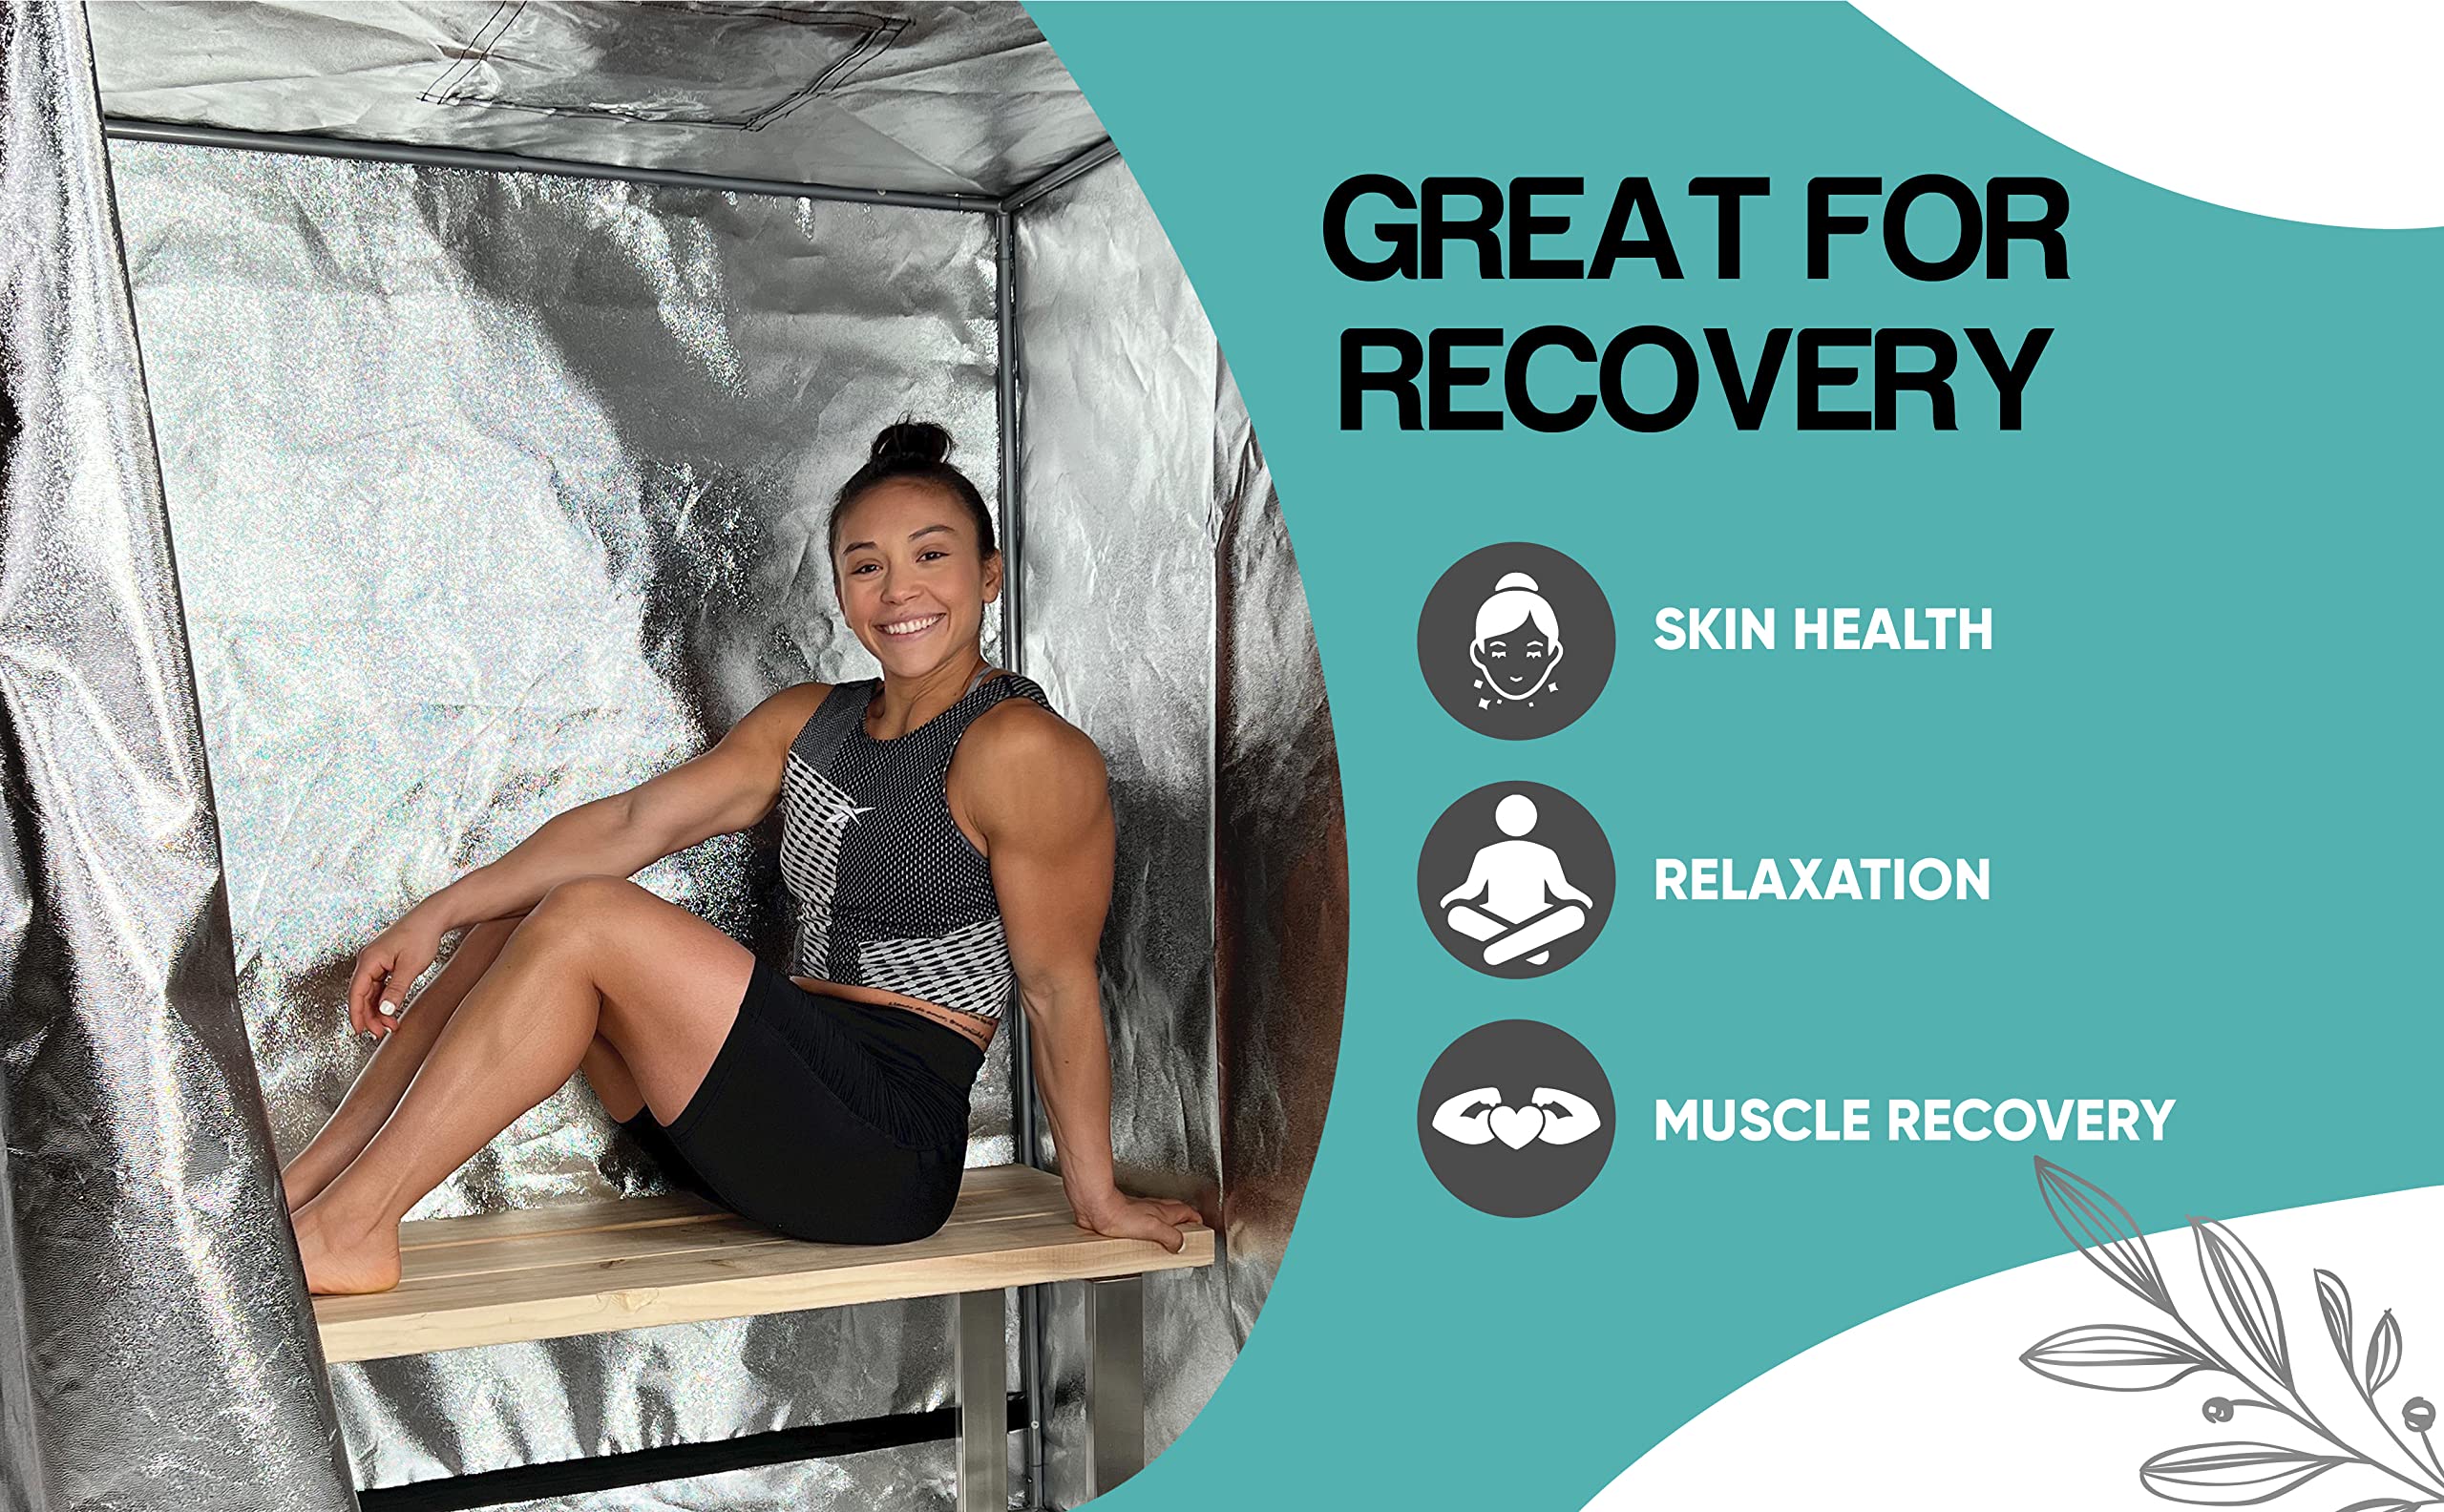 Sauna Rocket | 1-Person Full Body Sauna Portable Tent | in-Home Use for Relaxation, Recovery, and Wellness (Tent ONLY)